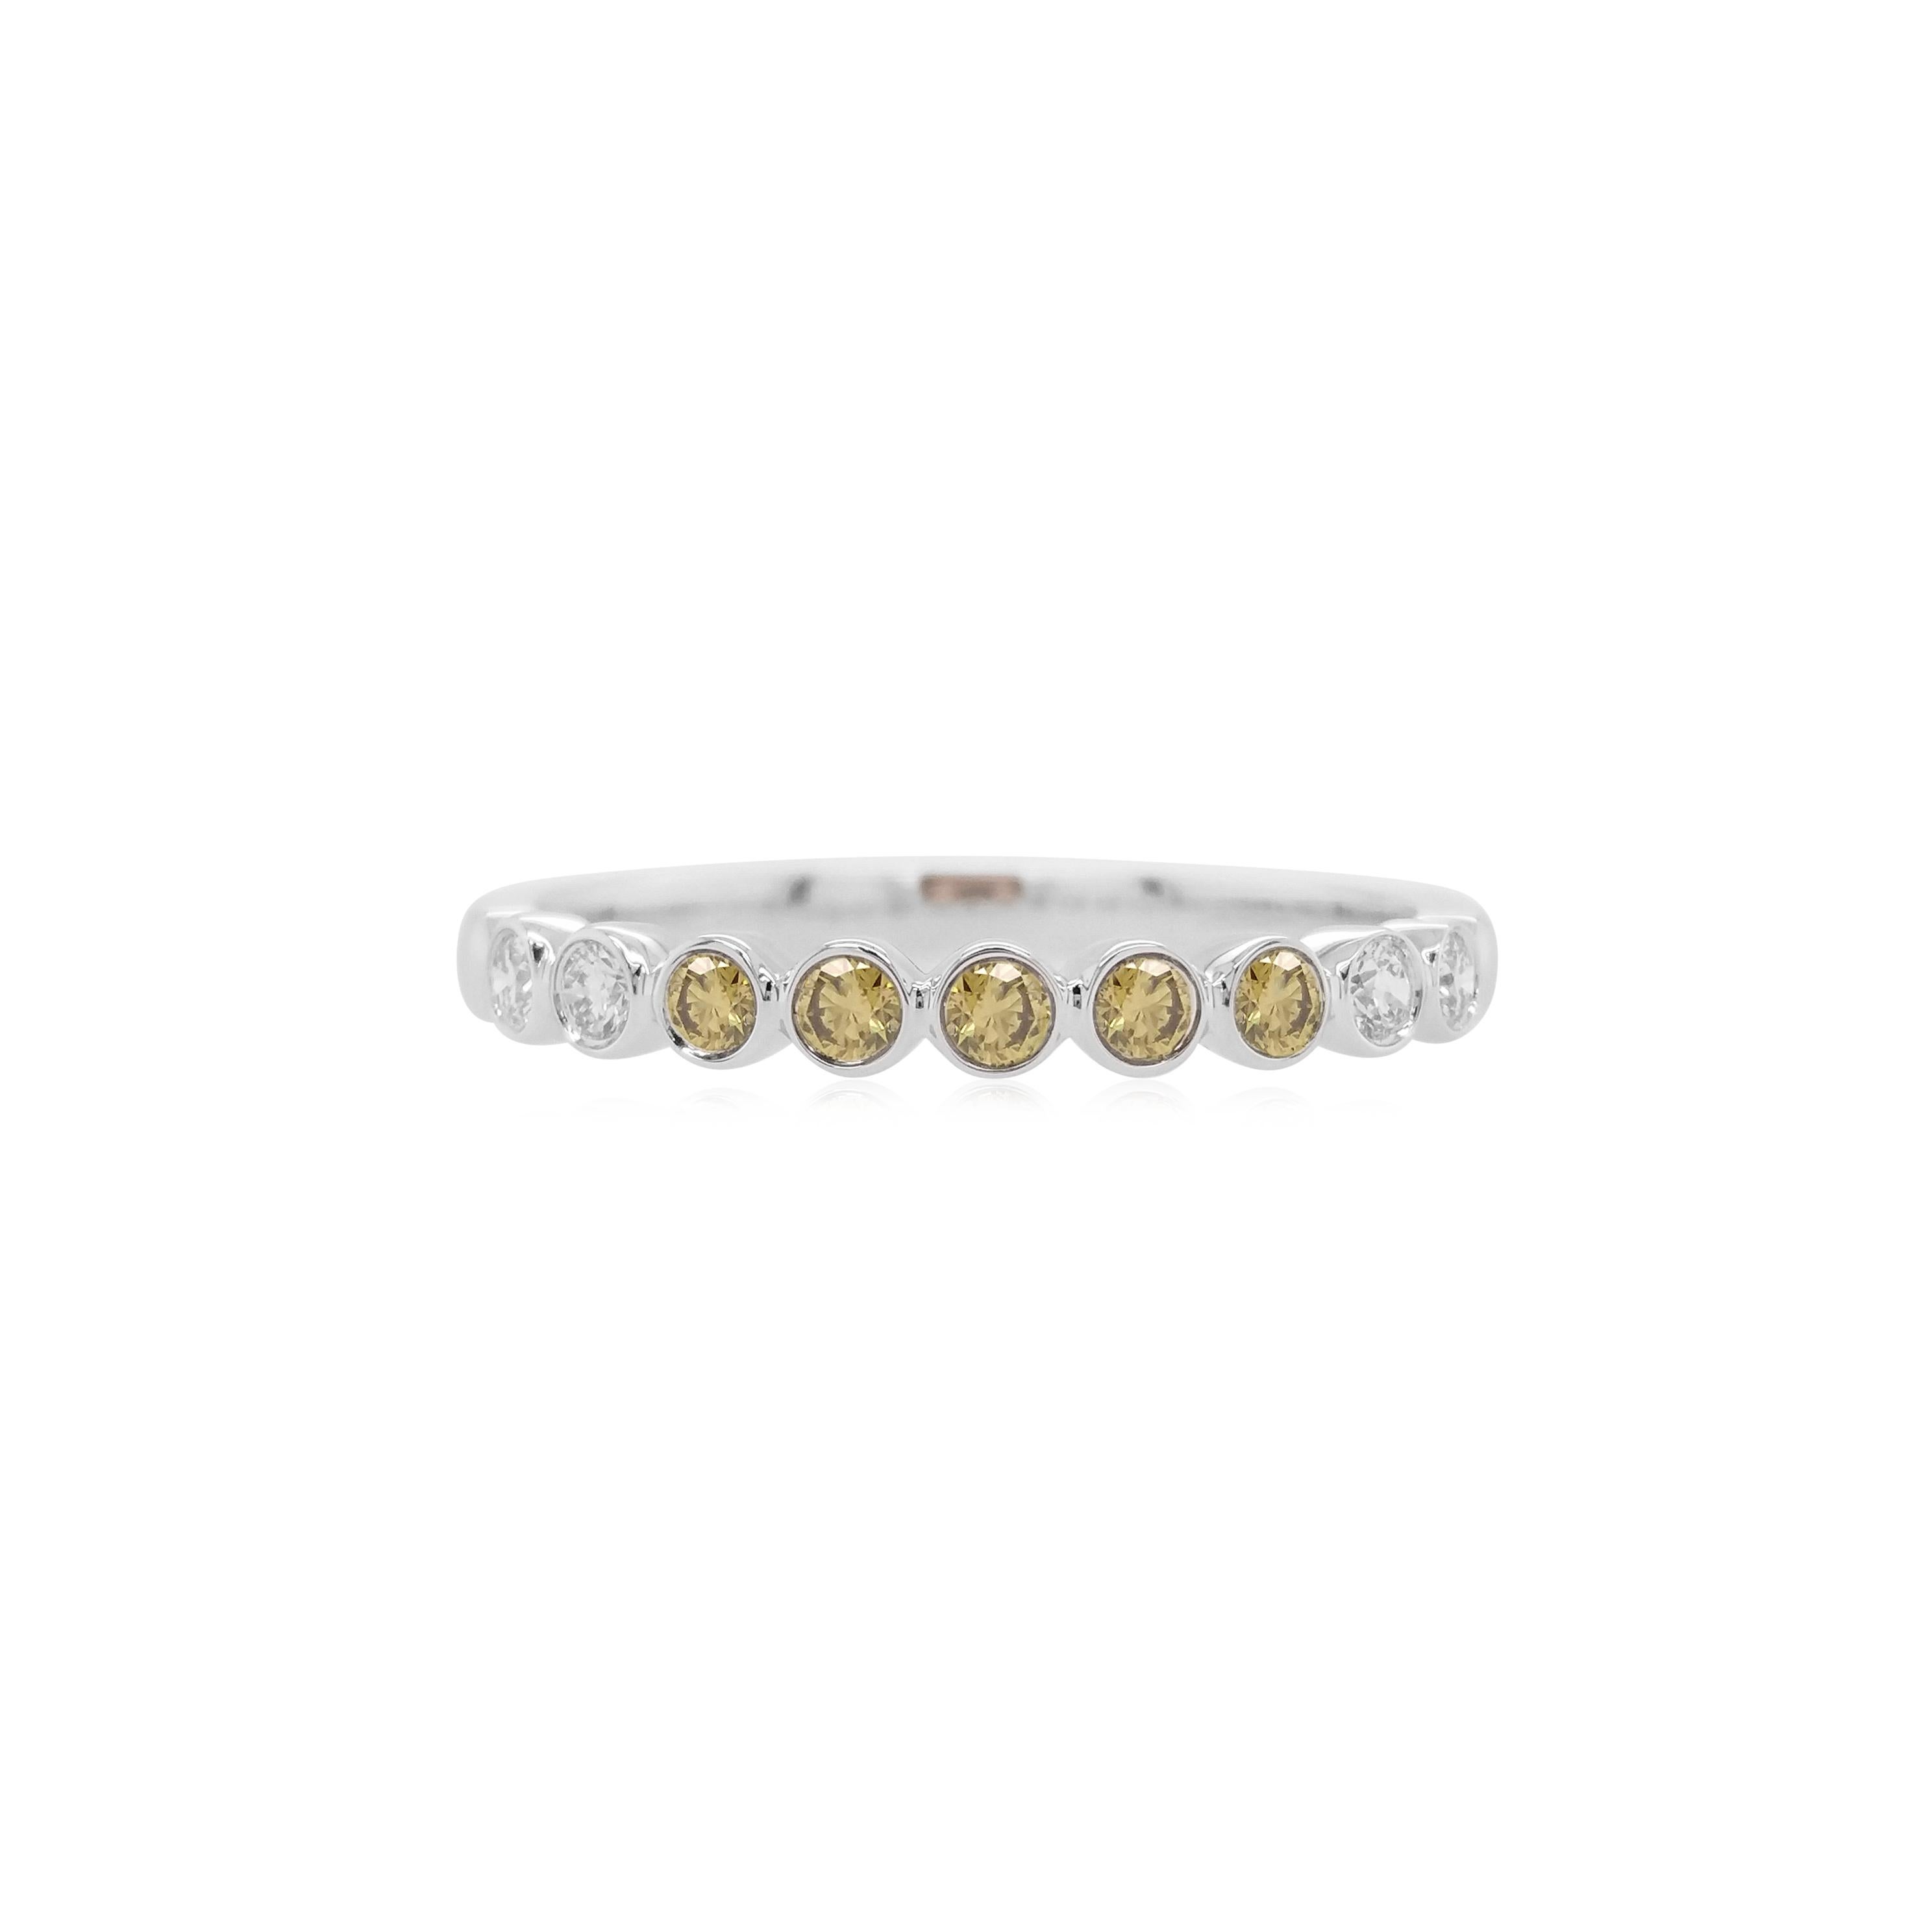 18K Gold ring made with rare and natural green diamonds with beautiful luster and fire, a special ring for your loved one.

Green Diamonds- 0.12 cts
White Diamonds- 0.10 cts


HYT Jewelry is a privately owned company headquartered in Hong Kong, with